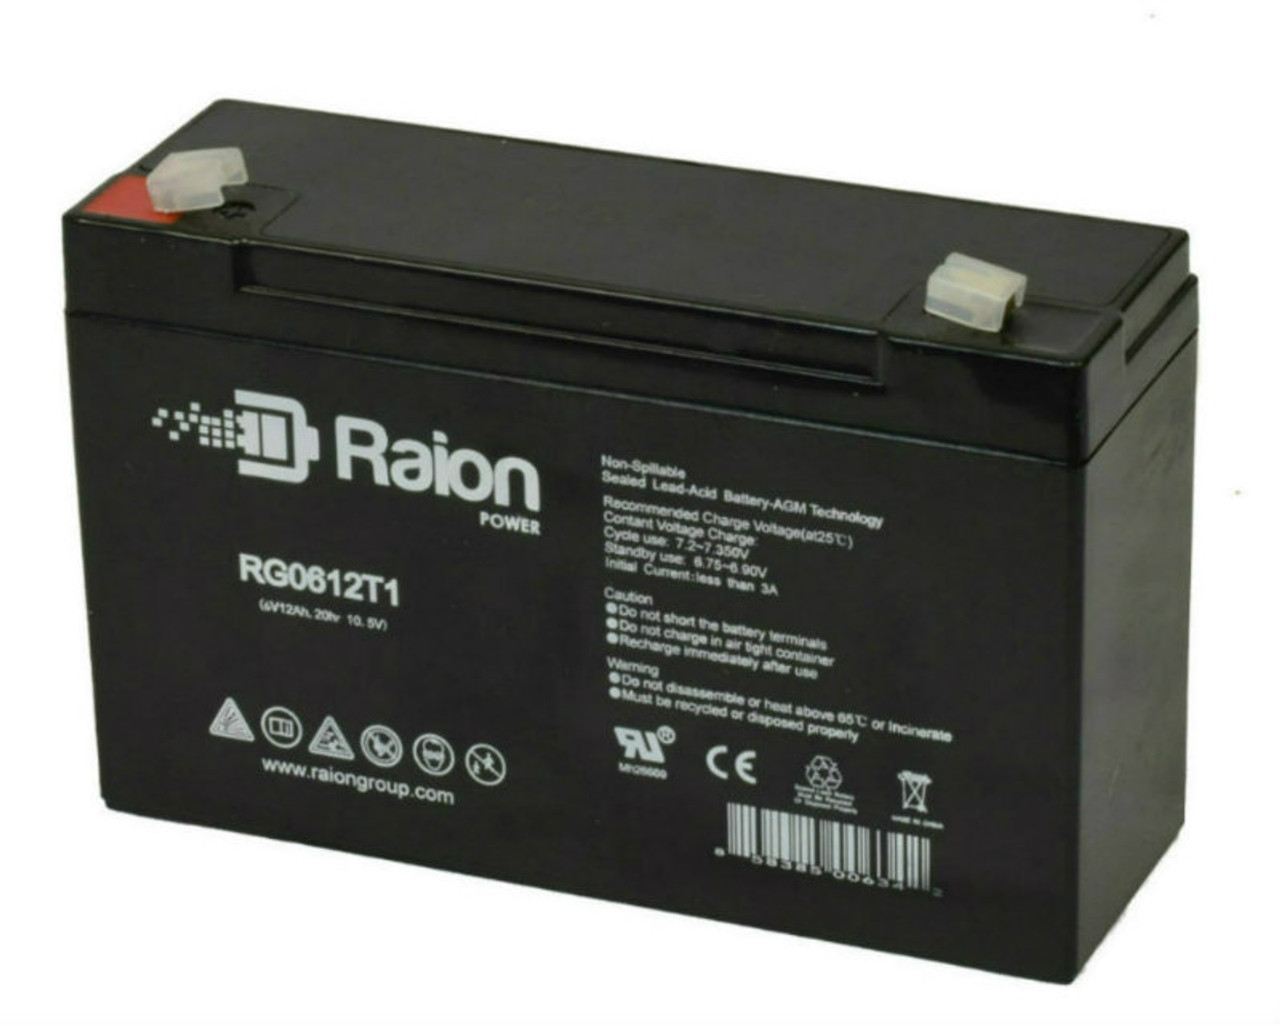 Raion Power RG06120T1 Replacement Battery for Leoch Battery LP6-14